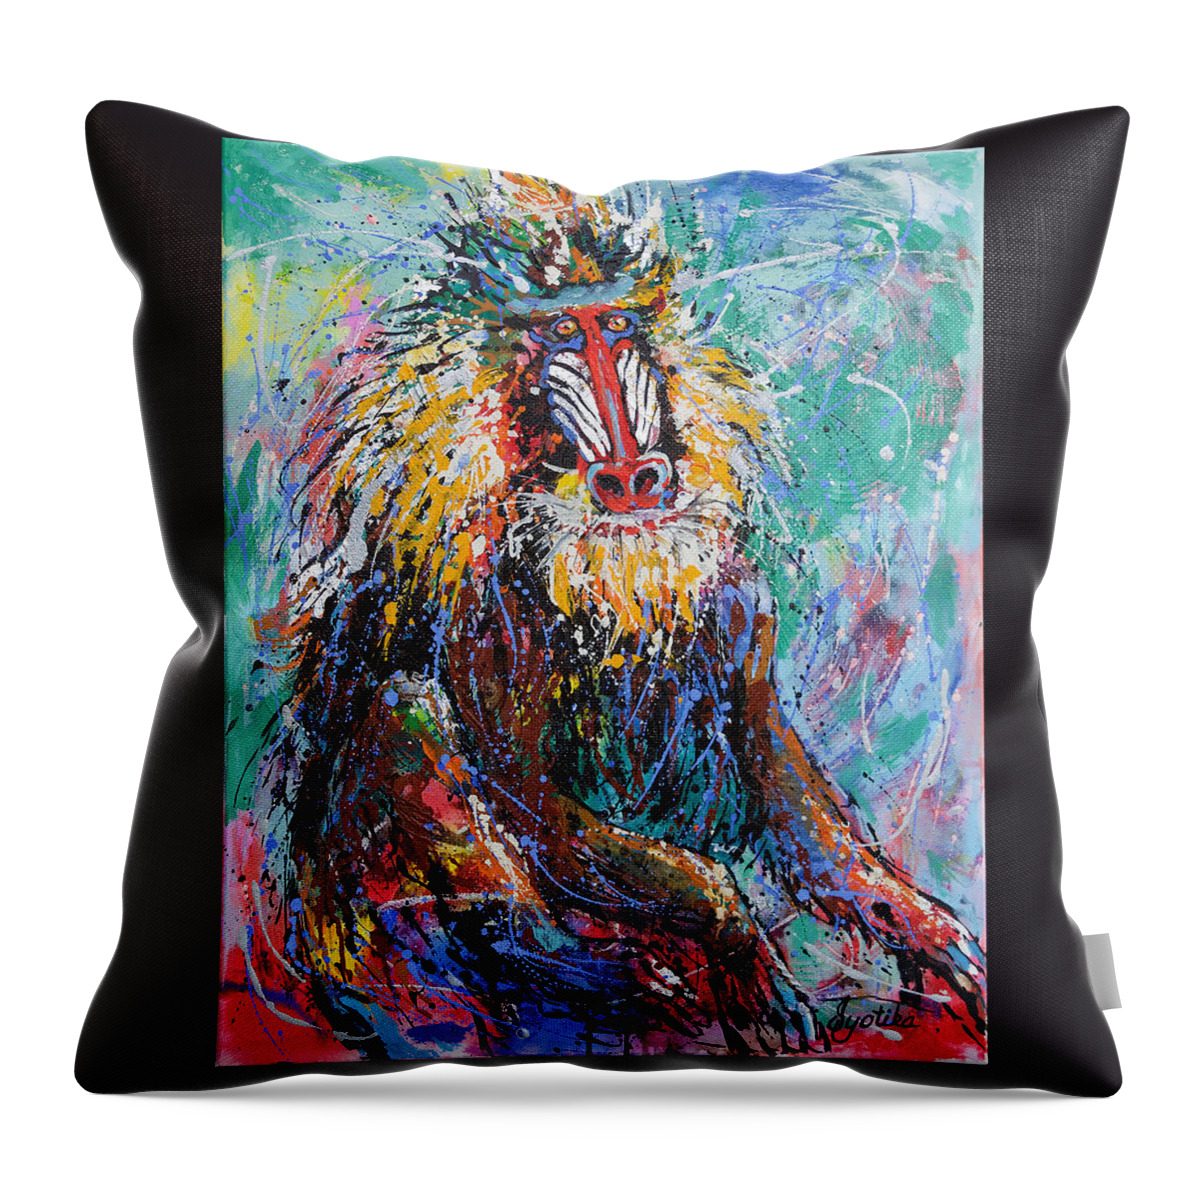 The Mandrill Throw Pillow featuring the painting Mandrill Baboon by Jyotika Shroff